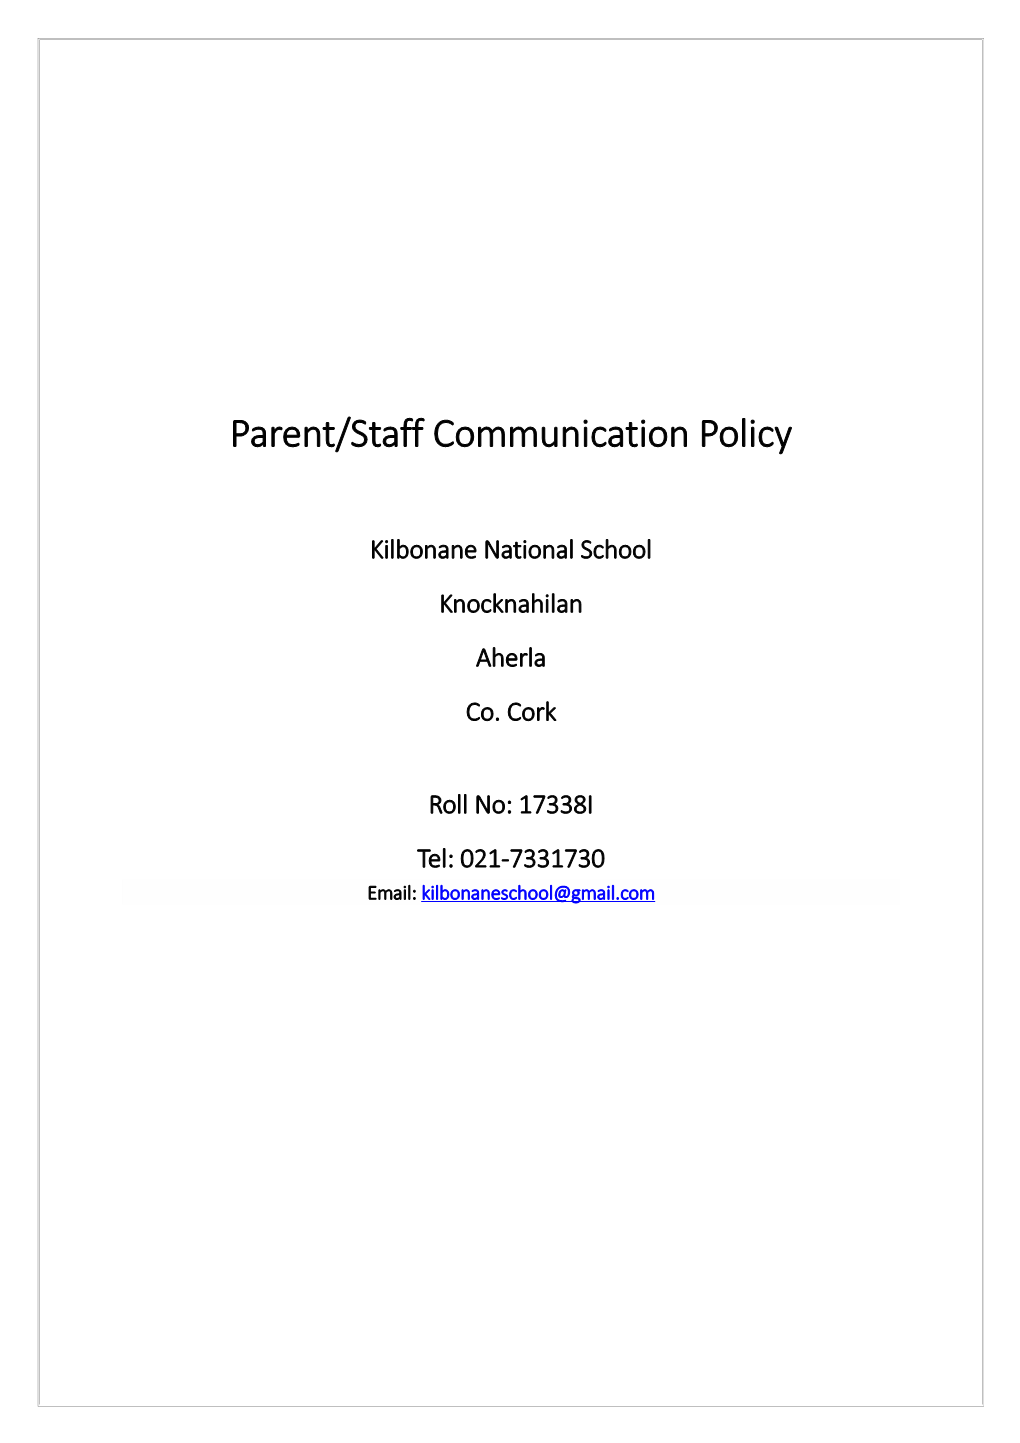 Parent/Staff Communication Policy